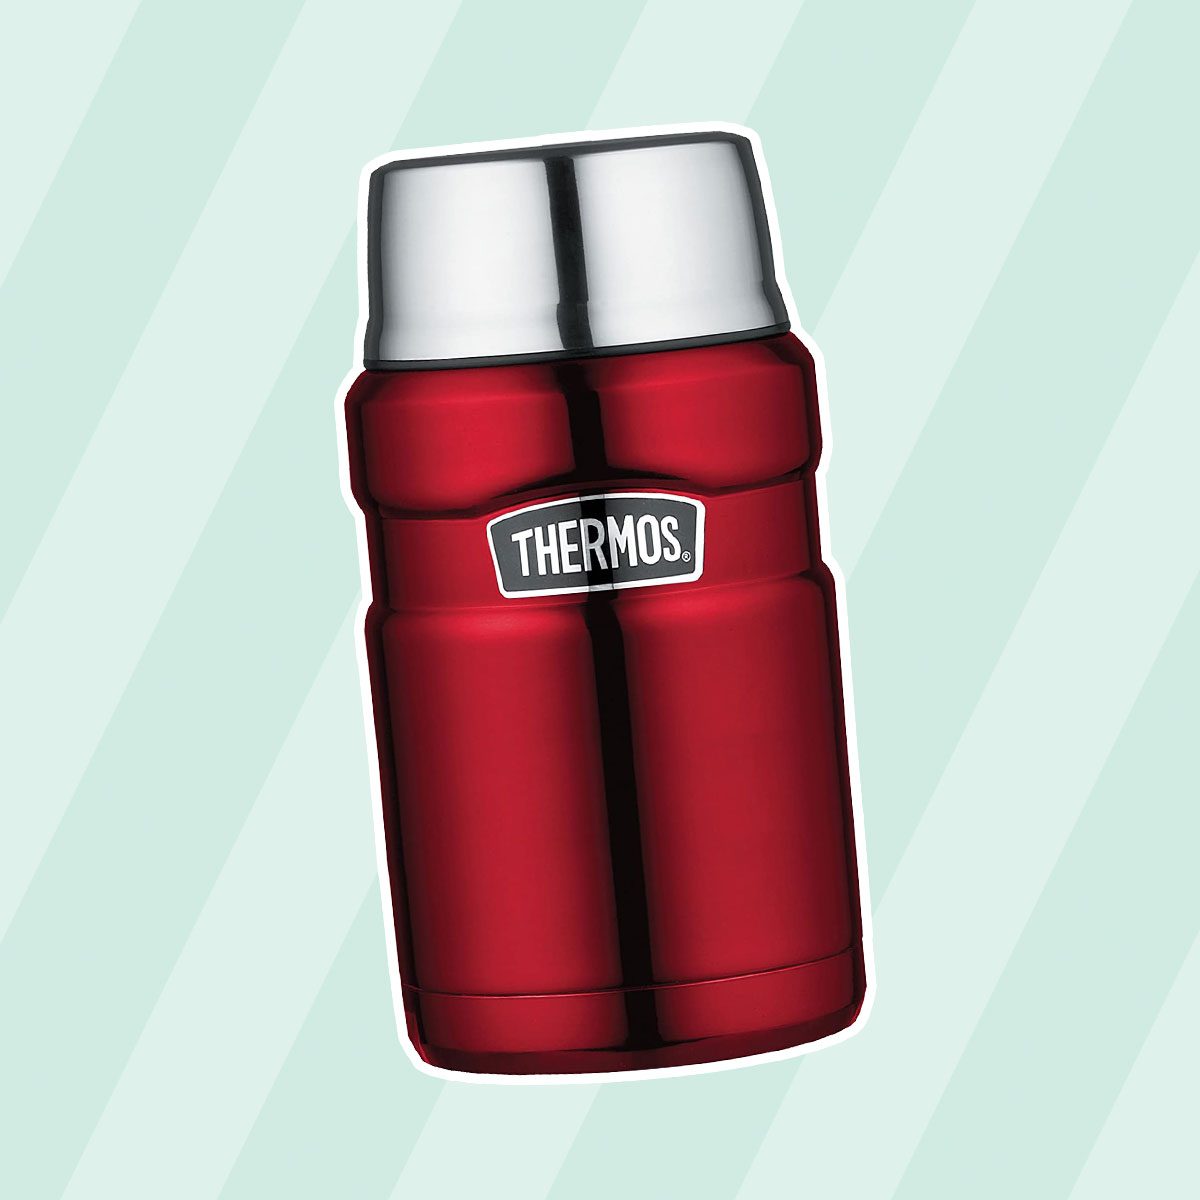 https://www.tasteofhome.com/wp-content/uploads/2020/09/Thermos-Stainless-King.jpg?fit=700%2C700